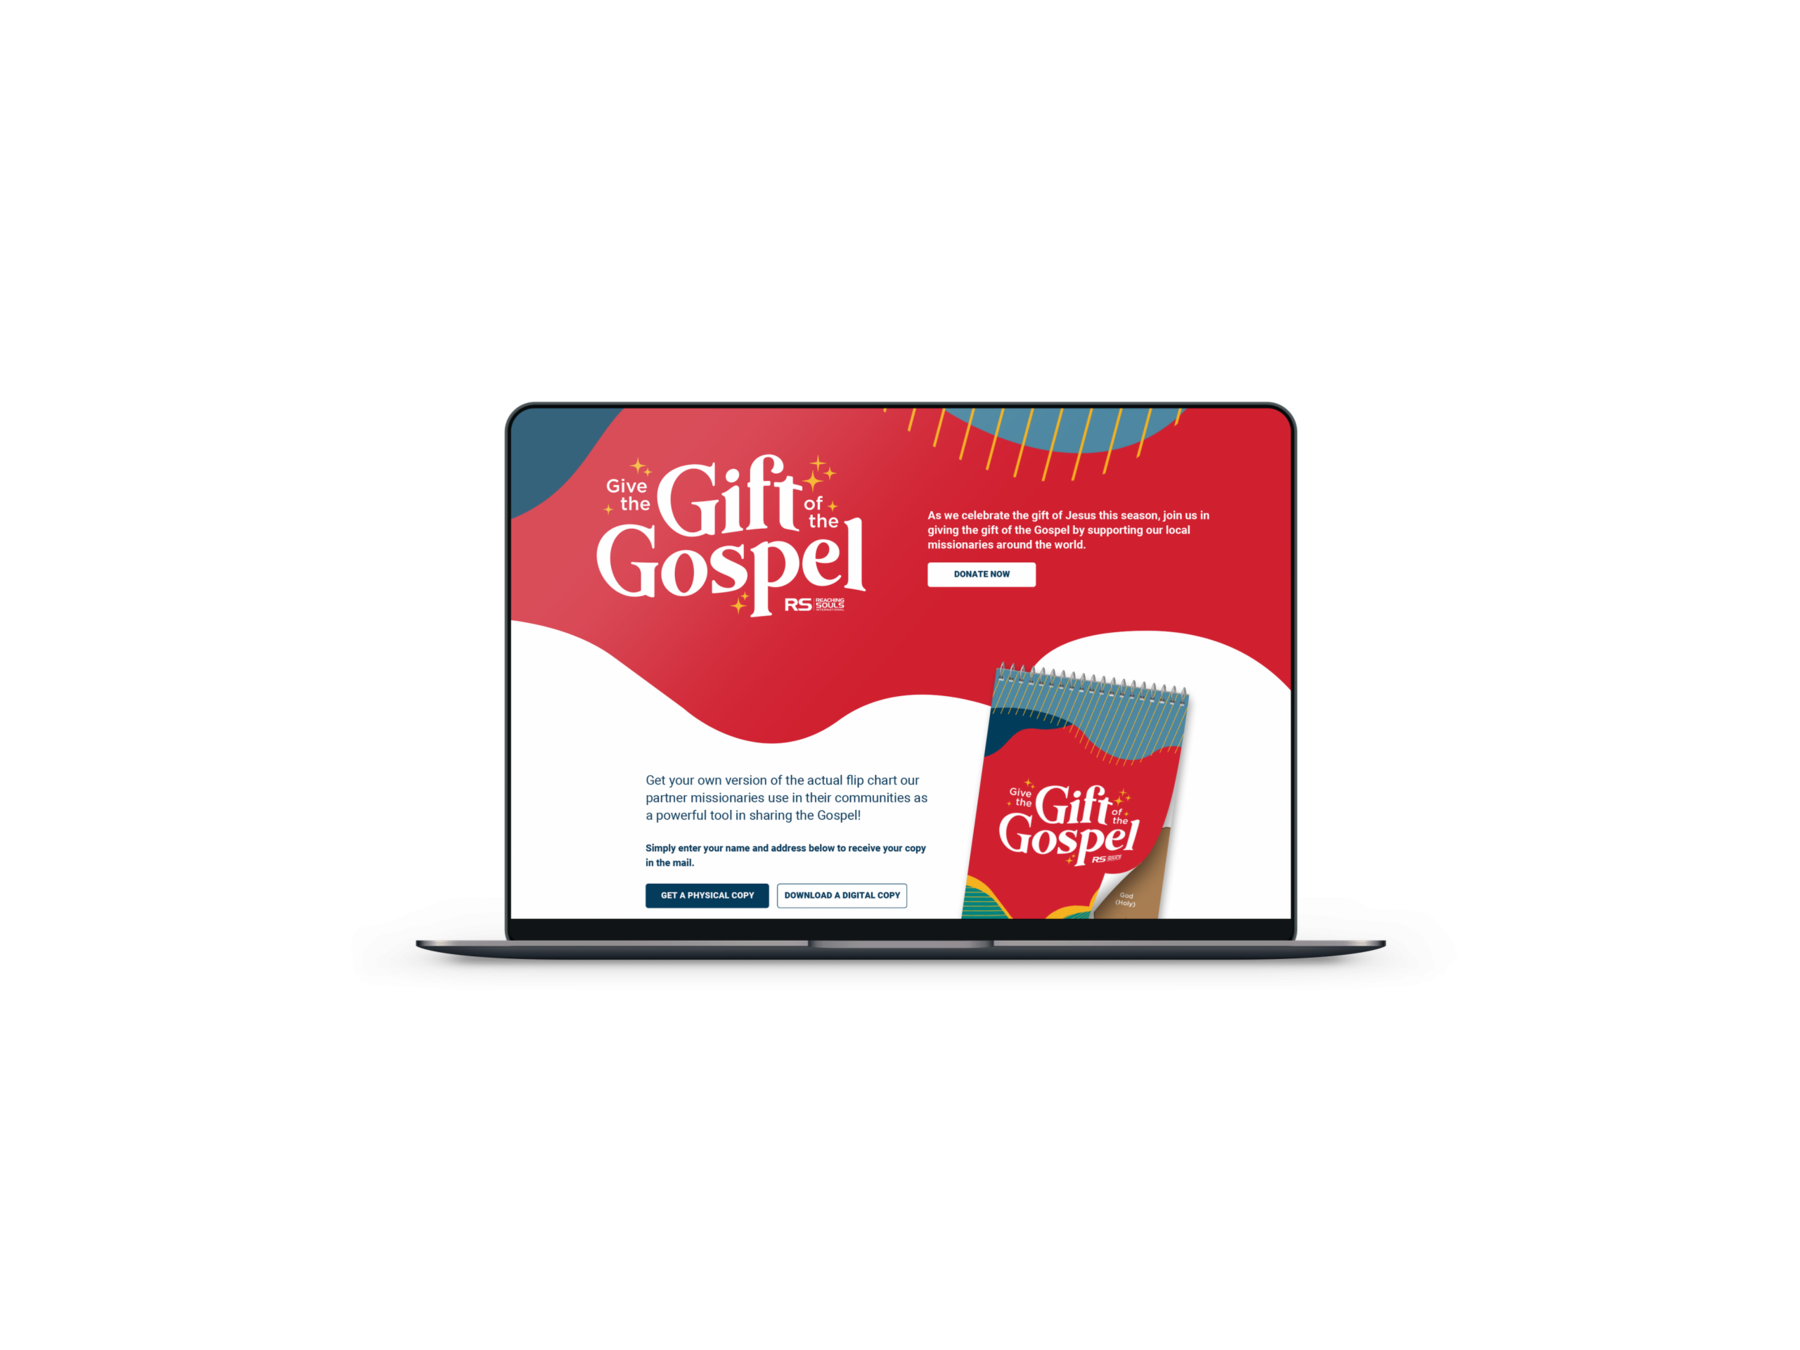 A mockup of the "Give the Gift of the Gospel" website design, which includes text and design